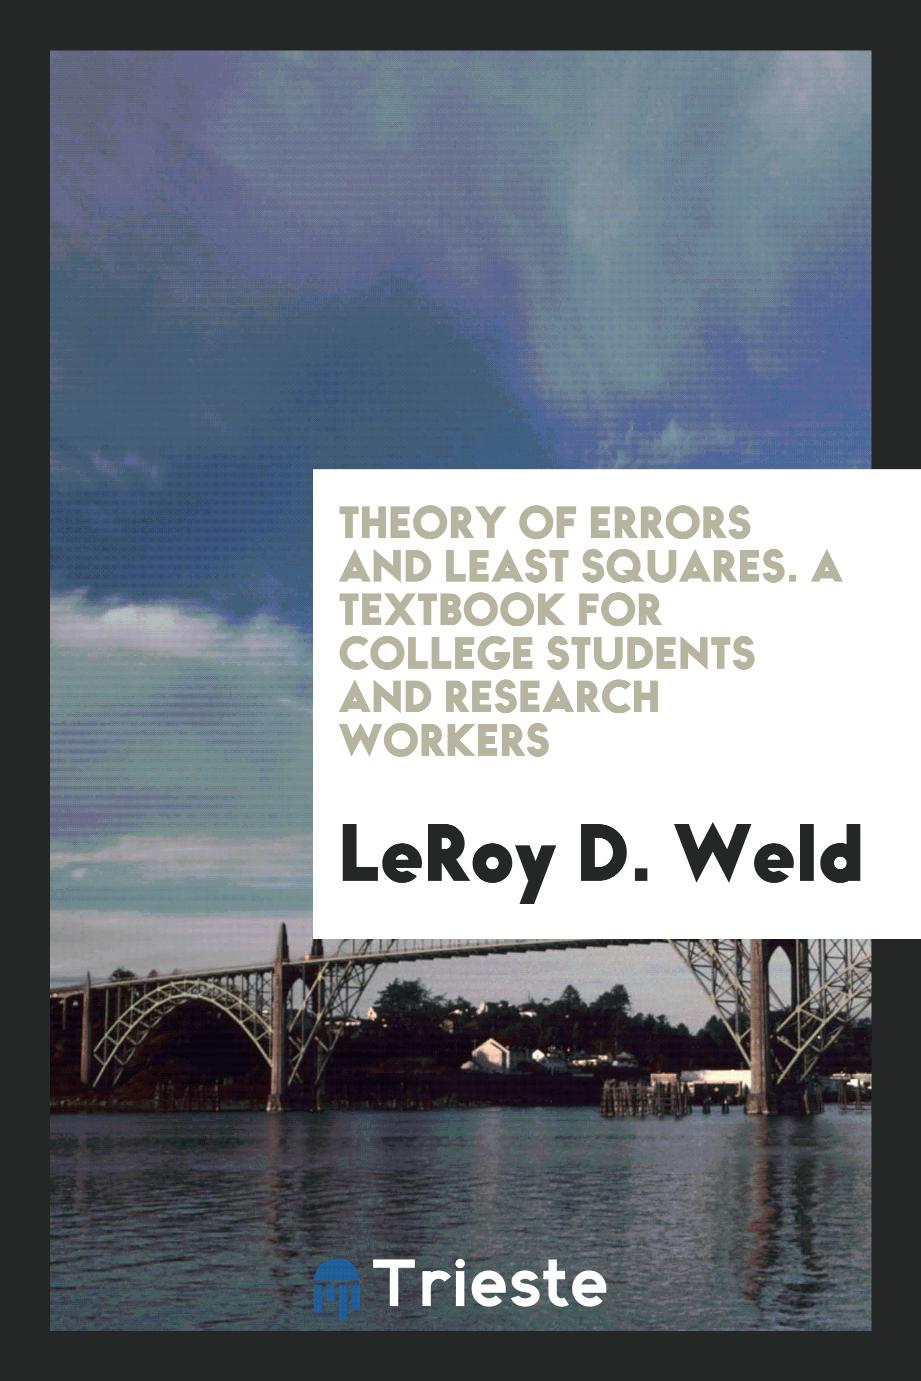 Theory of errors and least squares. A textbook for college students and research workers